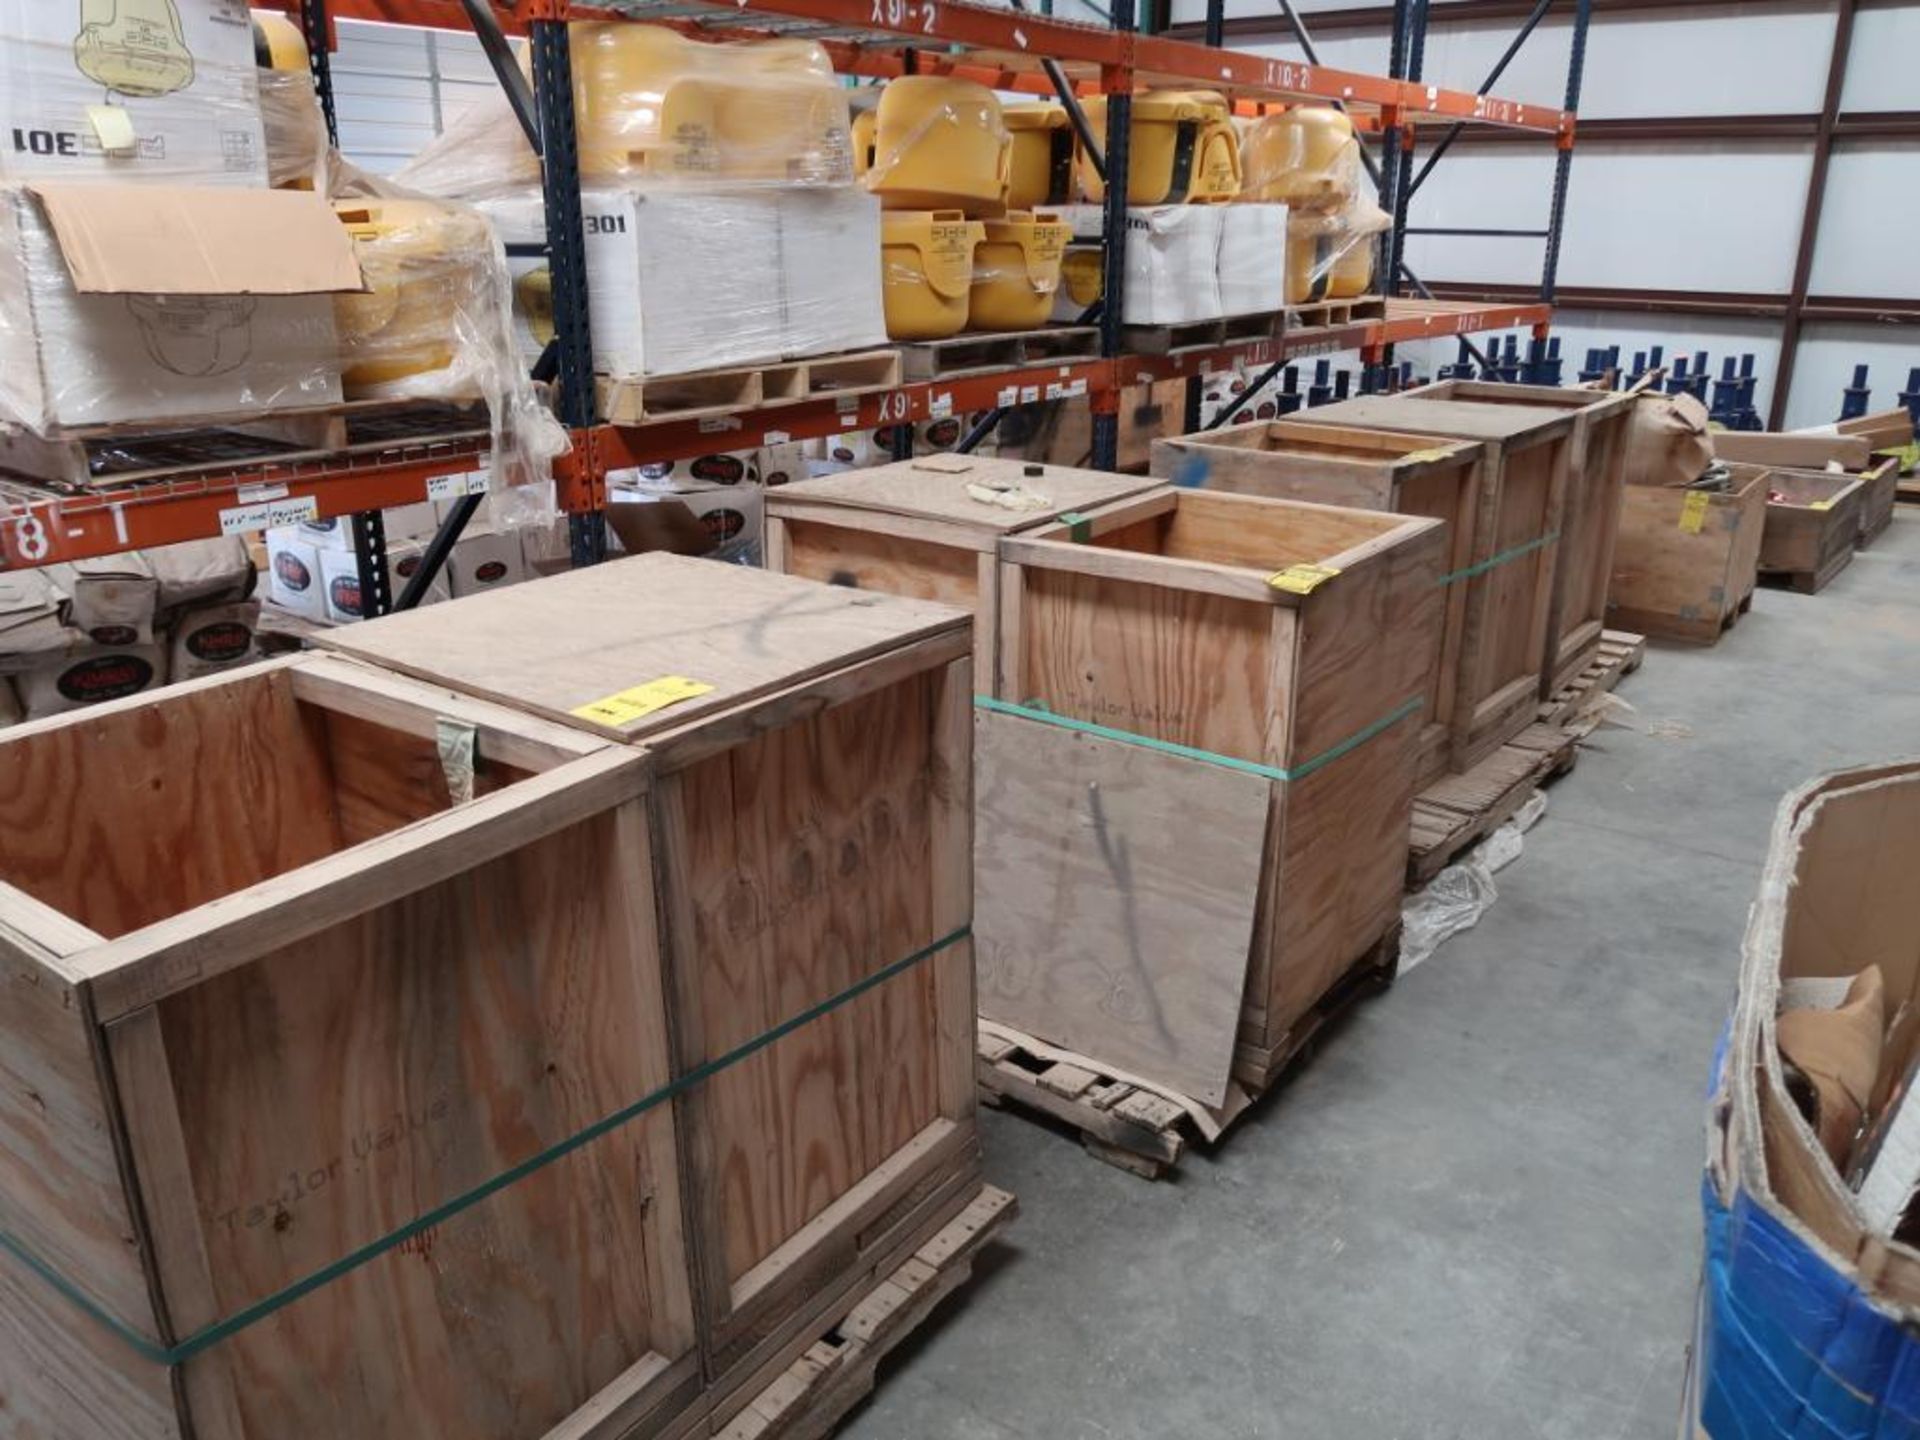 (LOT) (8) TAYLOR VALVES ON (4) PALLETS, TAYLOR RELIEF VALVES ON (2) PALLETS, AND ALUMINUM COVERS